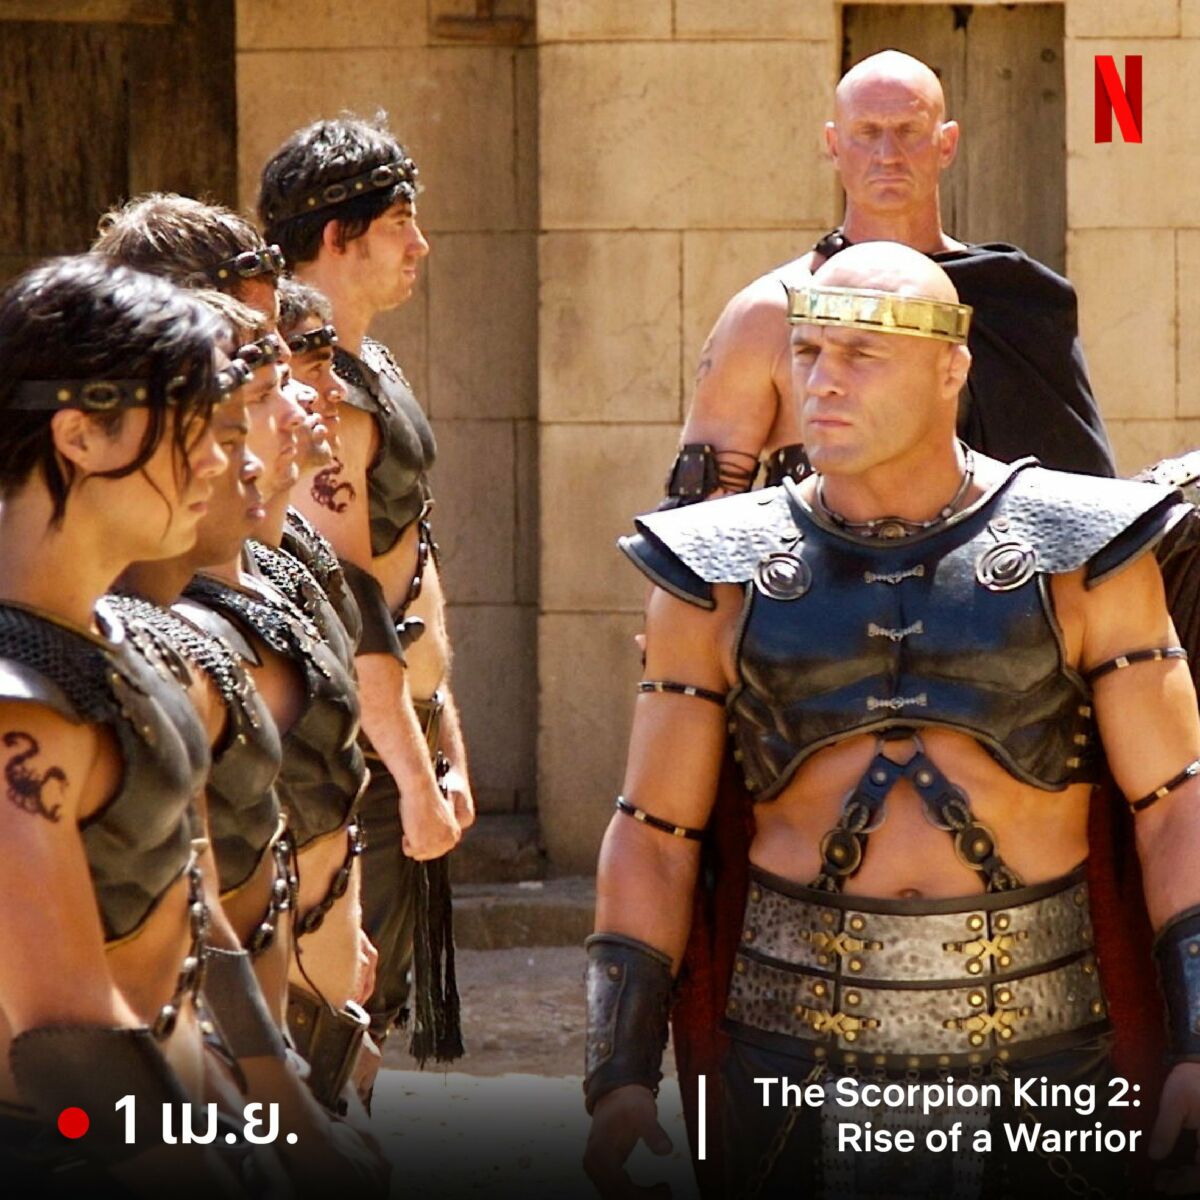  The Scorpion King 2: Rise of a Warrior